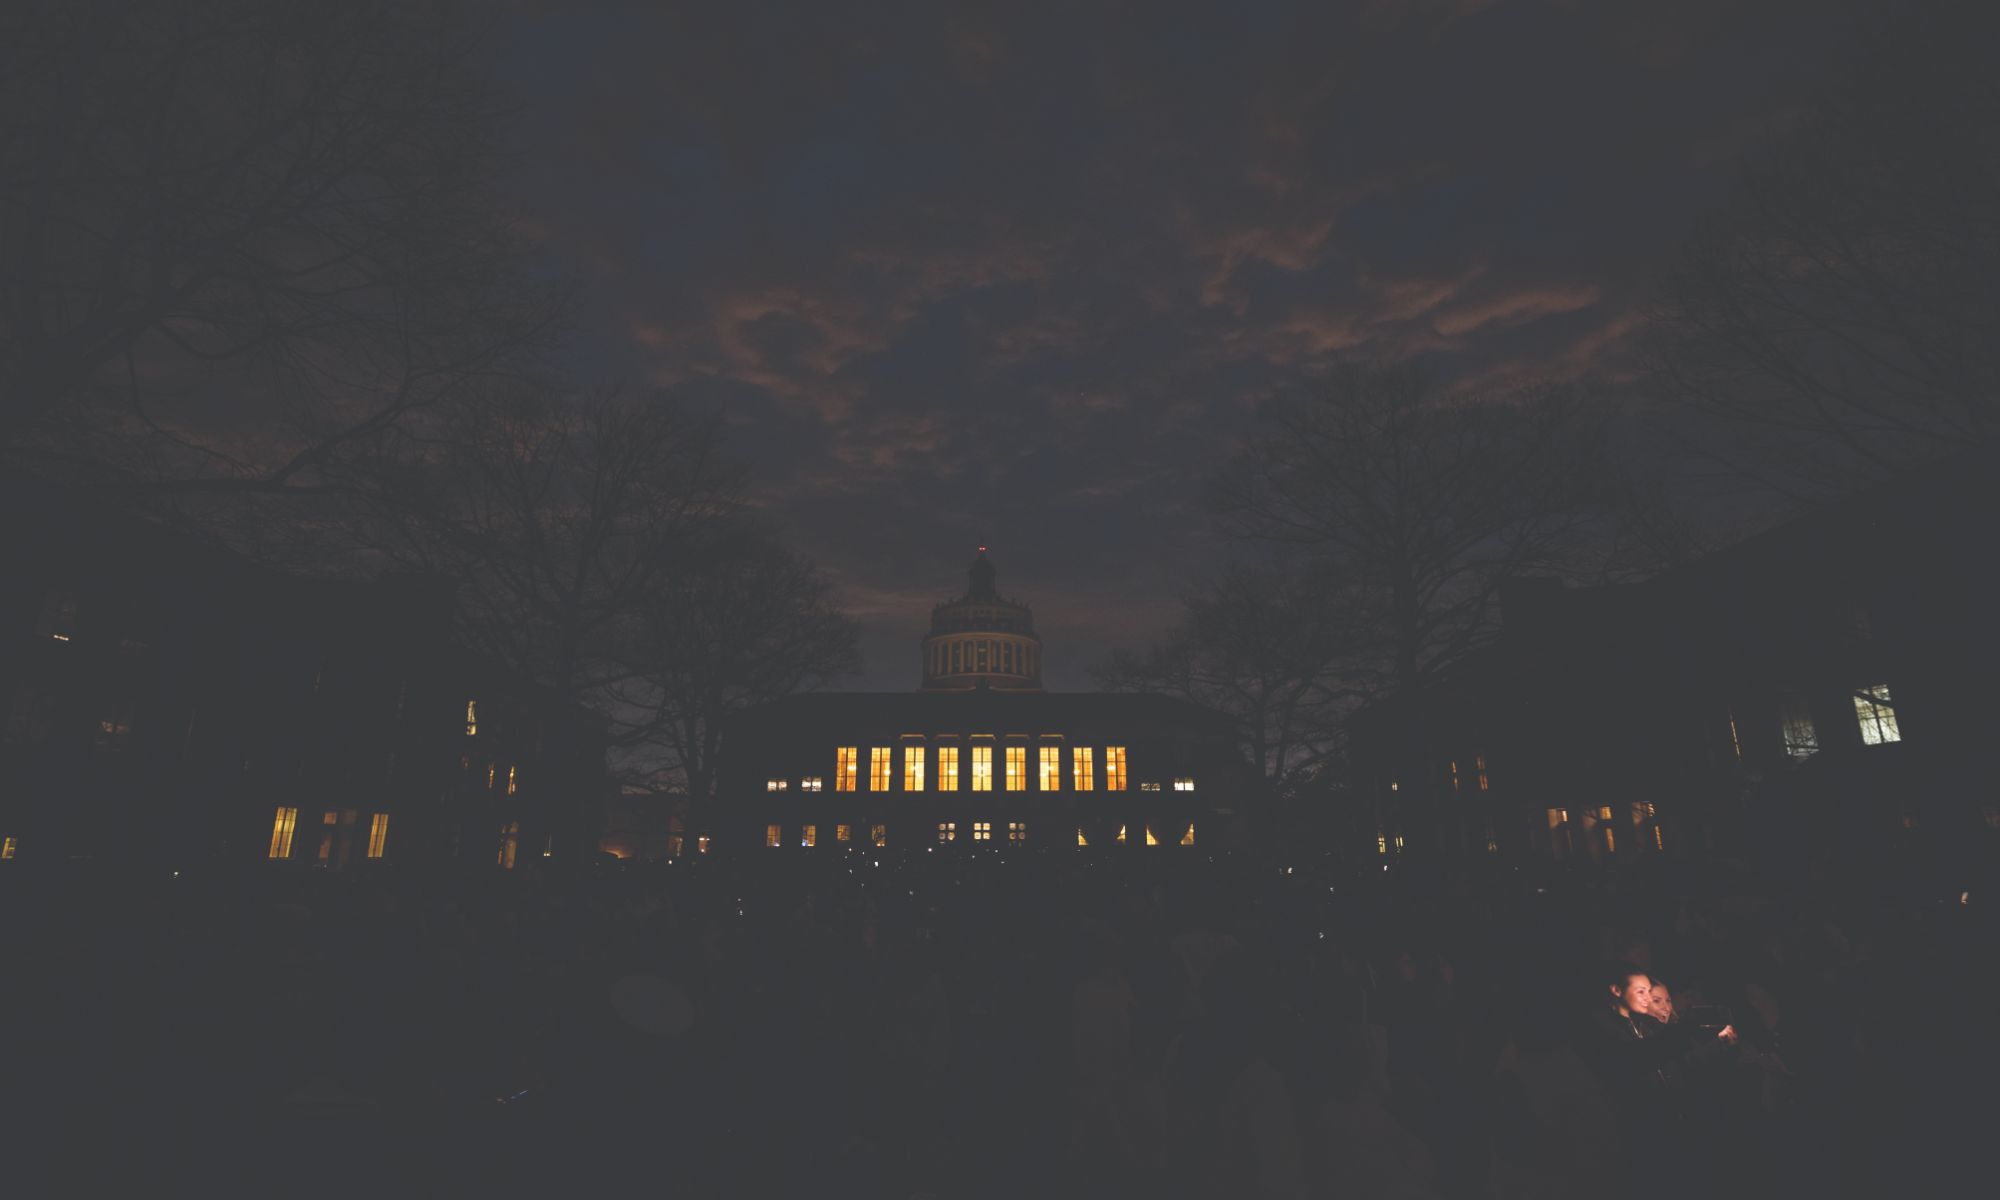 University of Rochester library is seen at dusk with its windows brightly illuminated. The sky is dark with scattered clouds, and the silhouettes of trees and people are visible in the foreground.